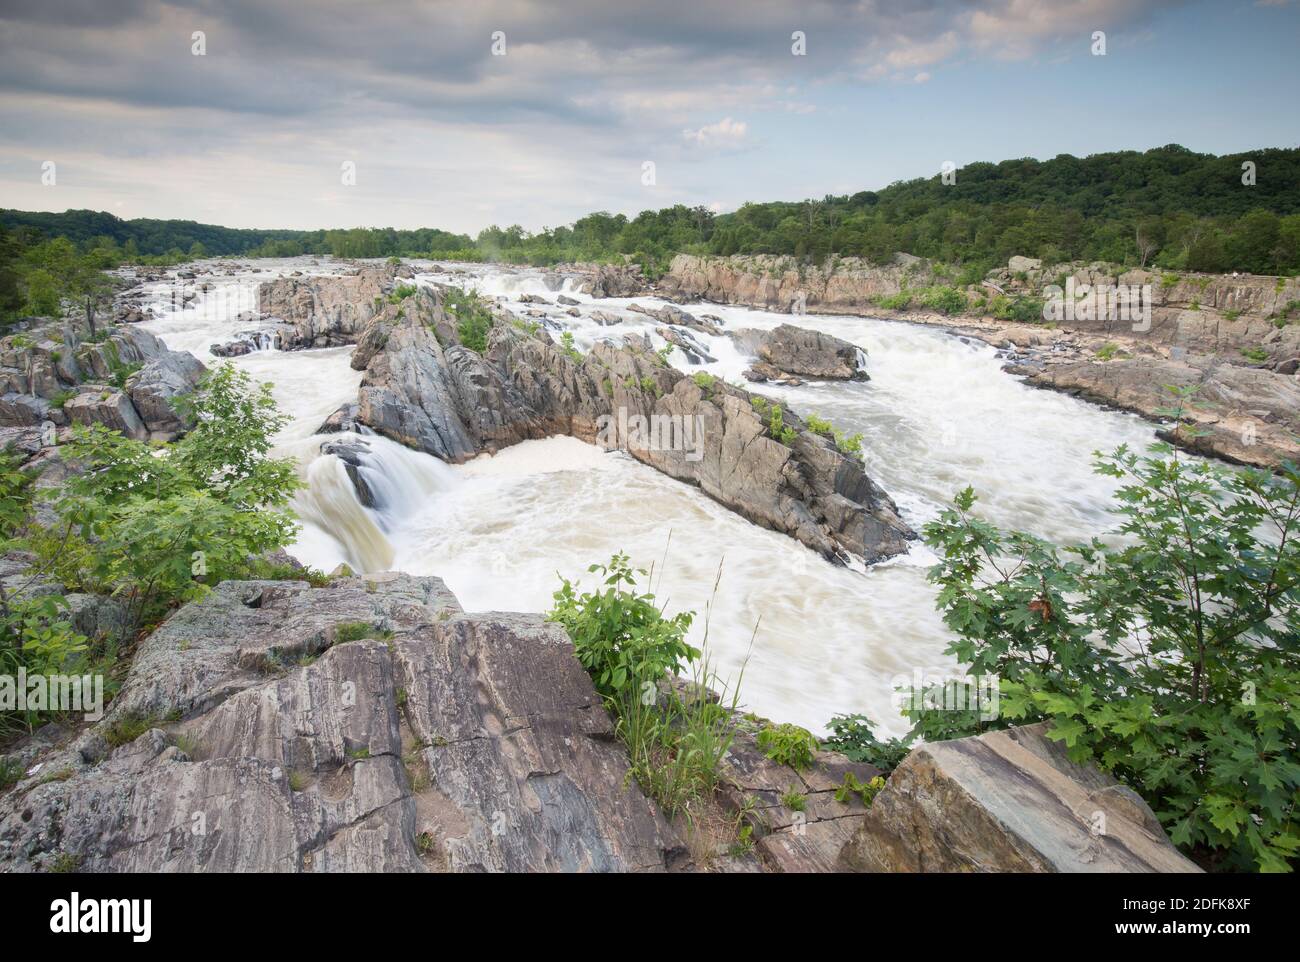 The Potomac River surges through a rocky gorge at Great Falls. Stock Photo